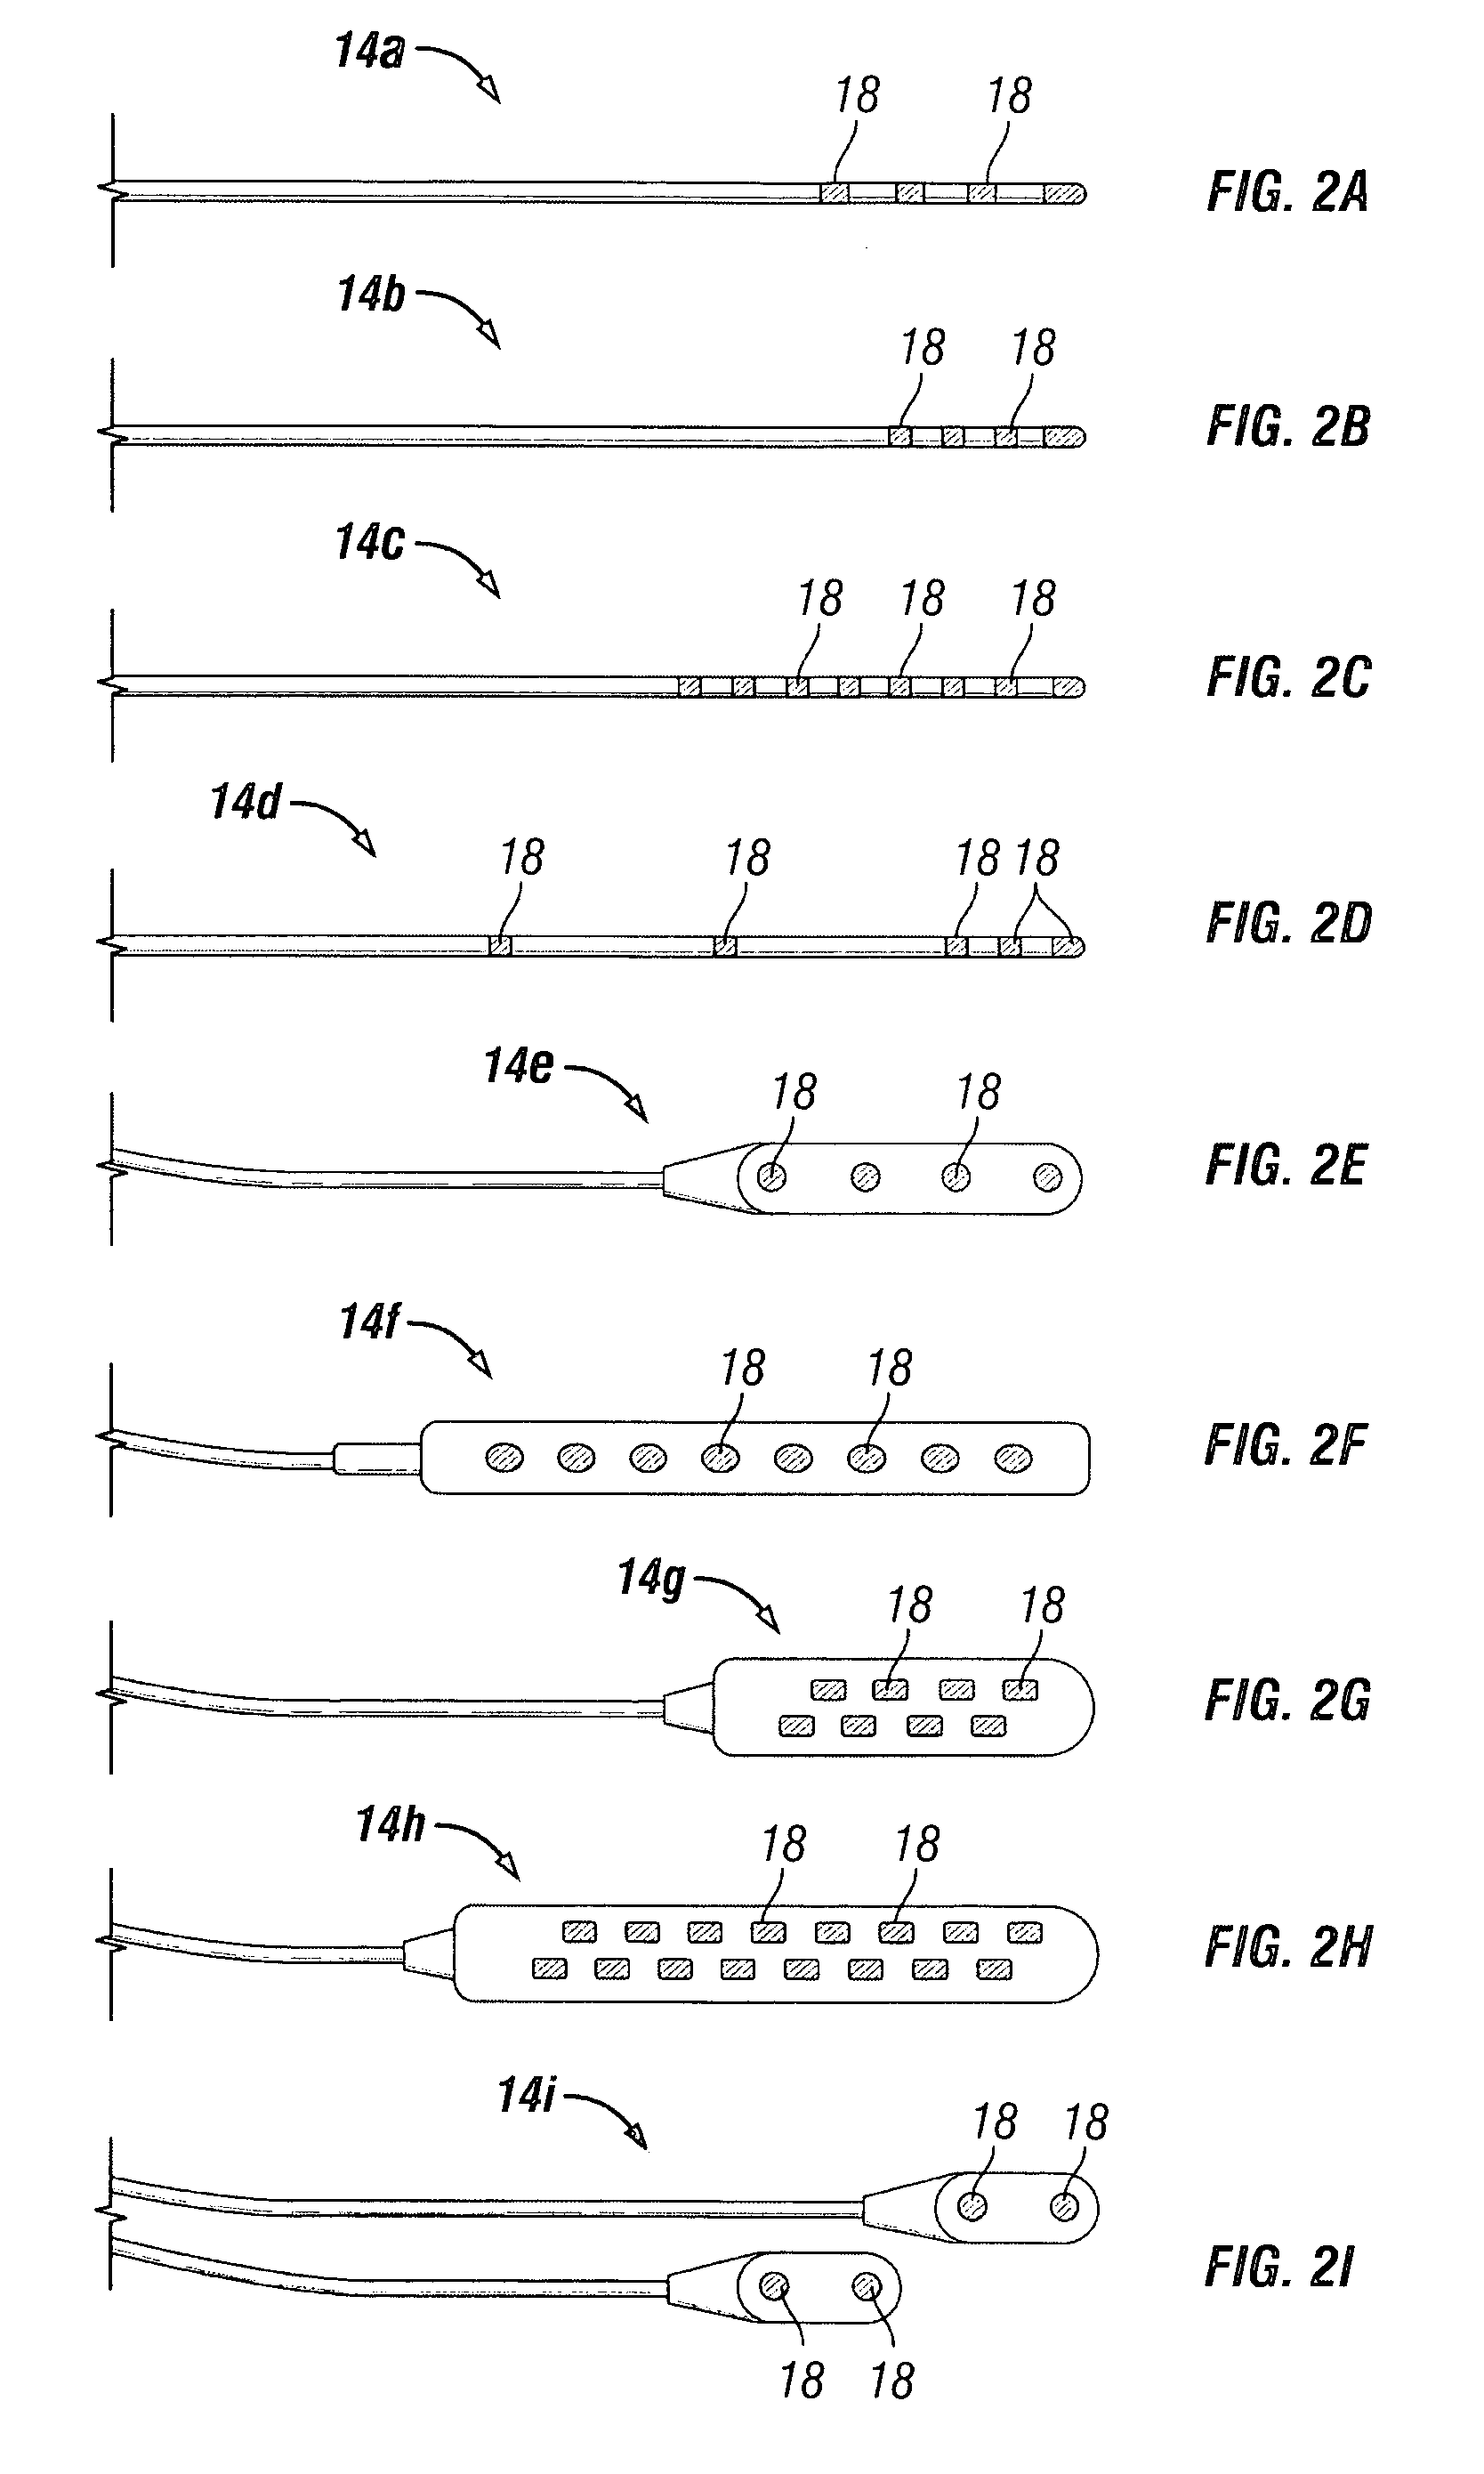 Stimulation system and method for treating a neurological disorder